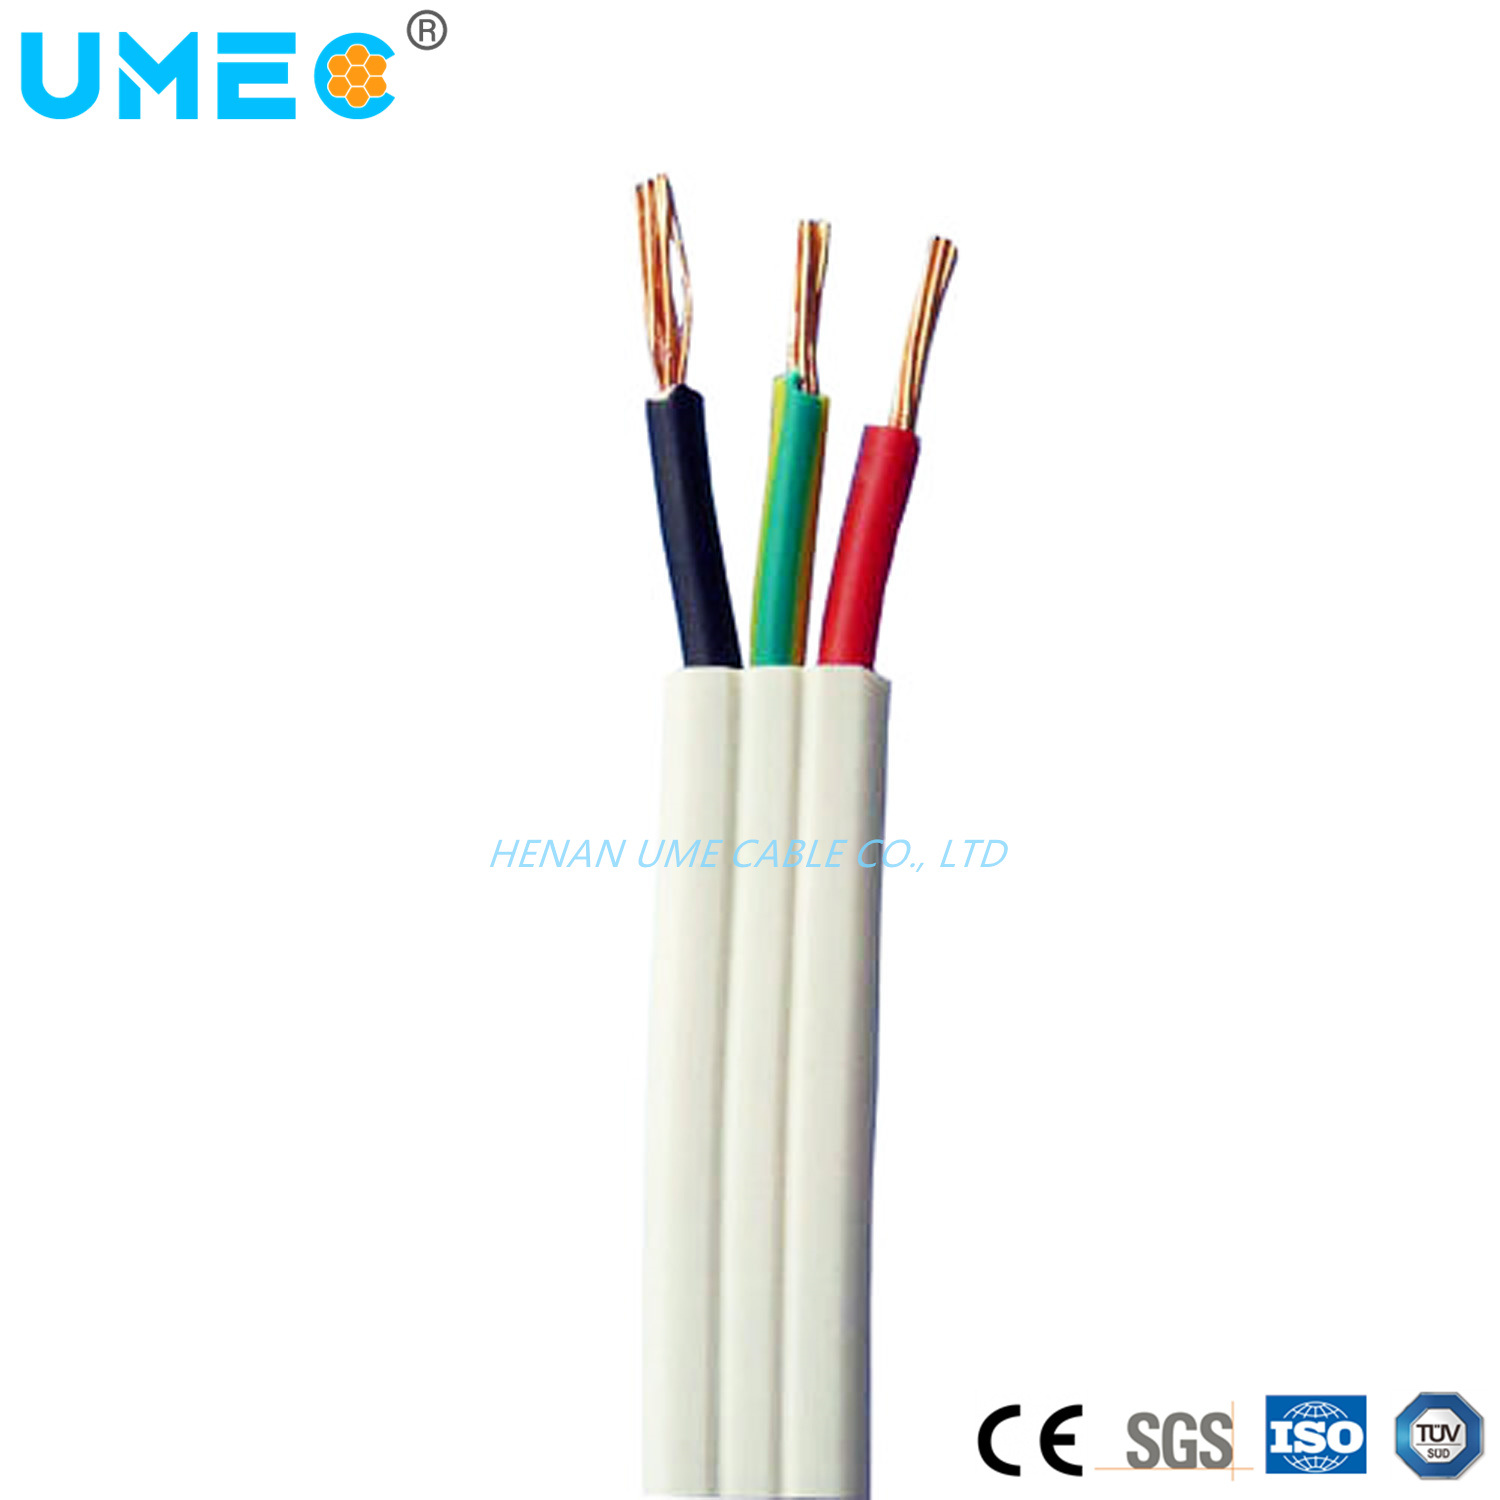 All Types of 2 Core 3 Core and Twin and Earth TPS Flat Electrical Cable Wire in Australia and New Zealand Standard